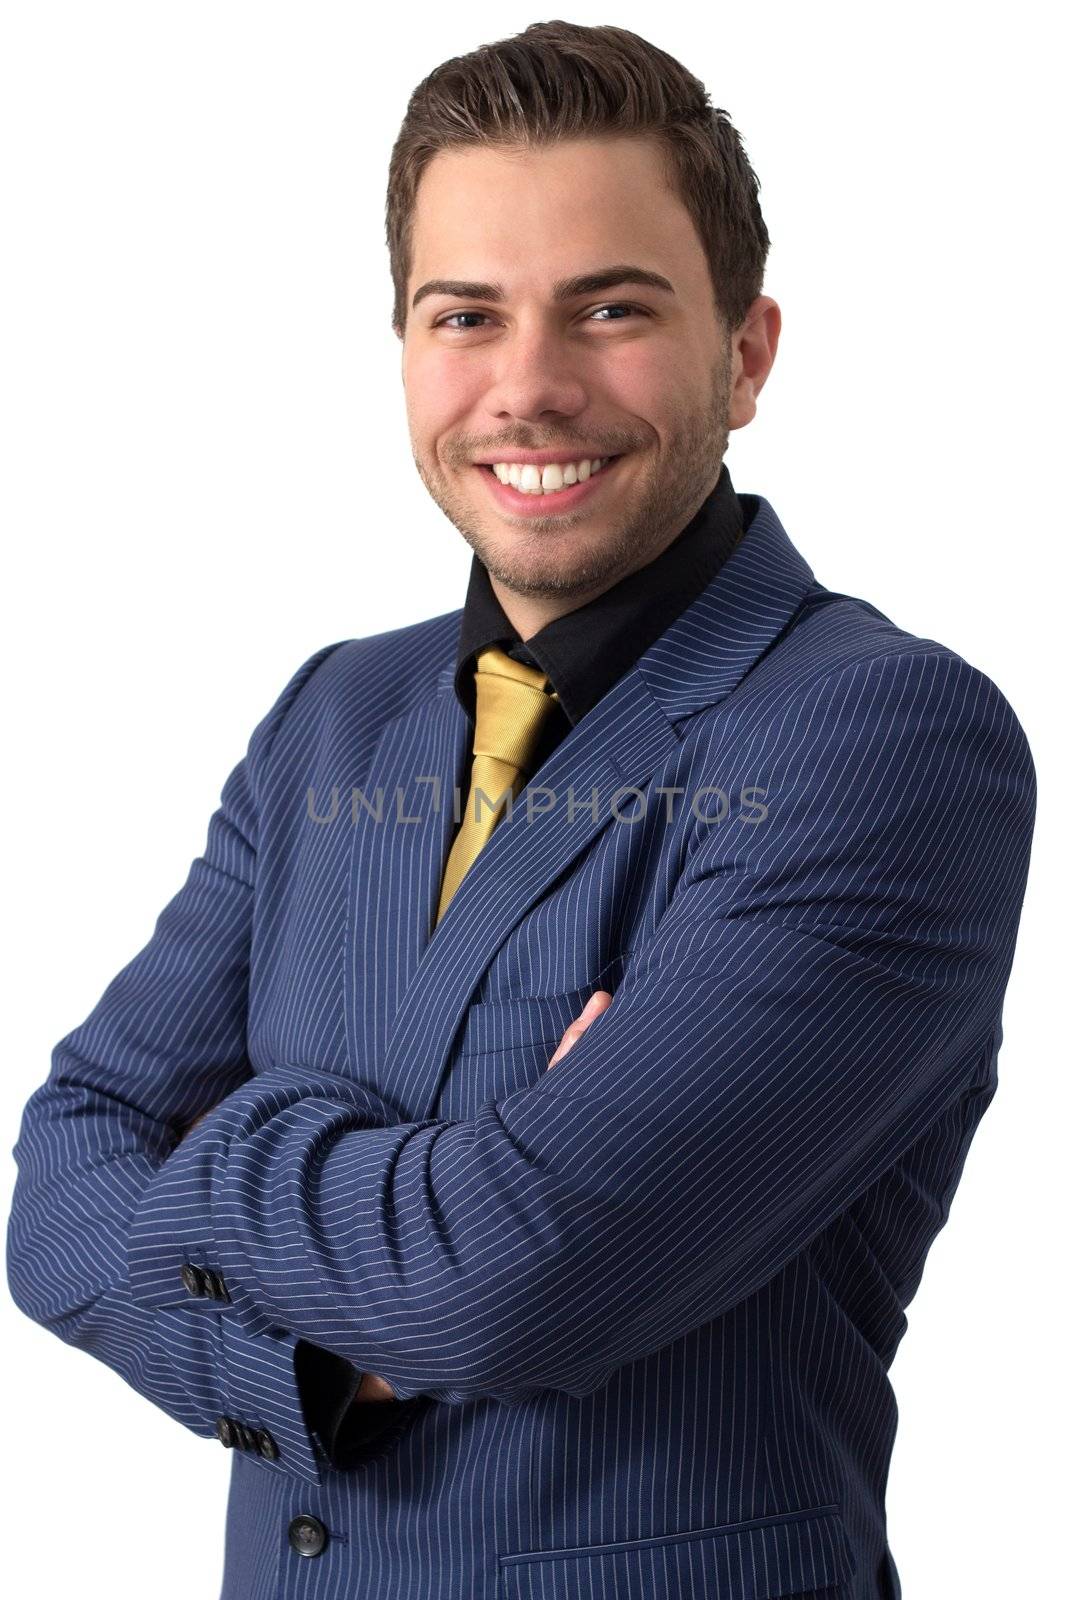 A young sympathetic businessman in a Blue suit with a golden tie